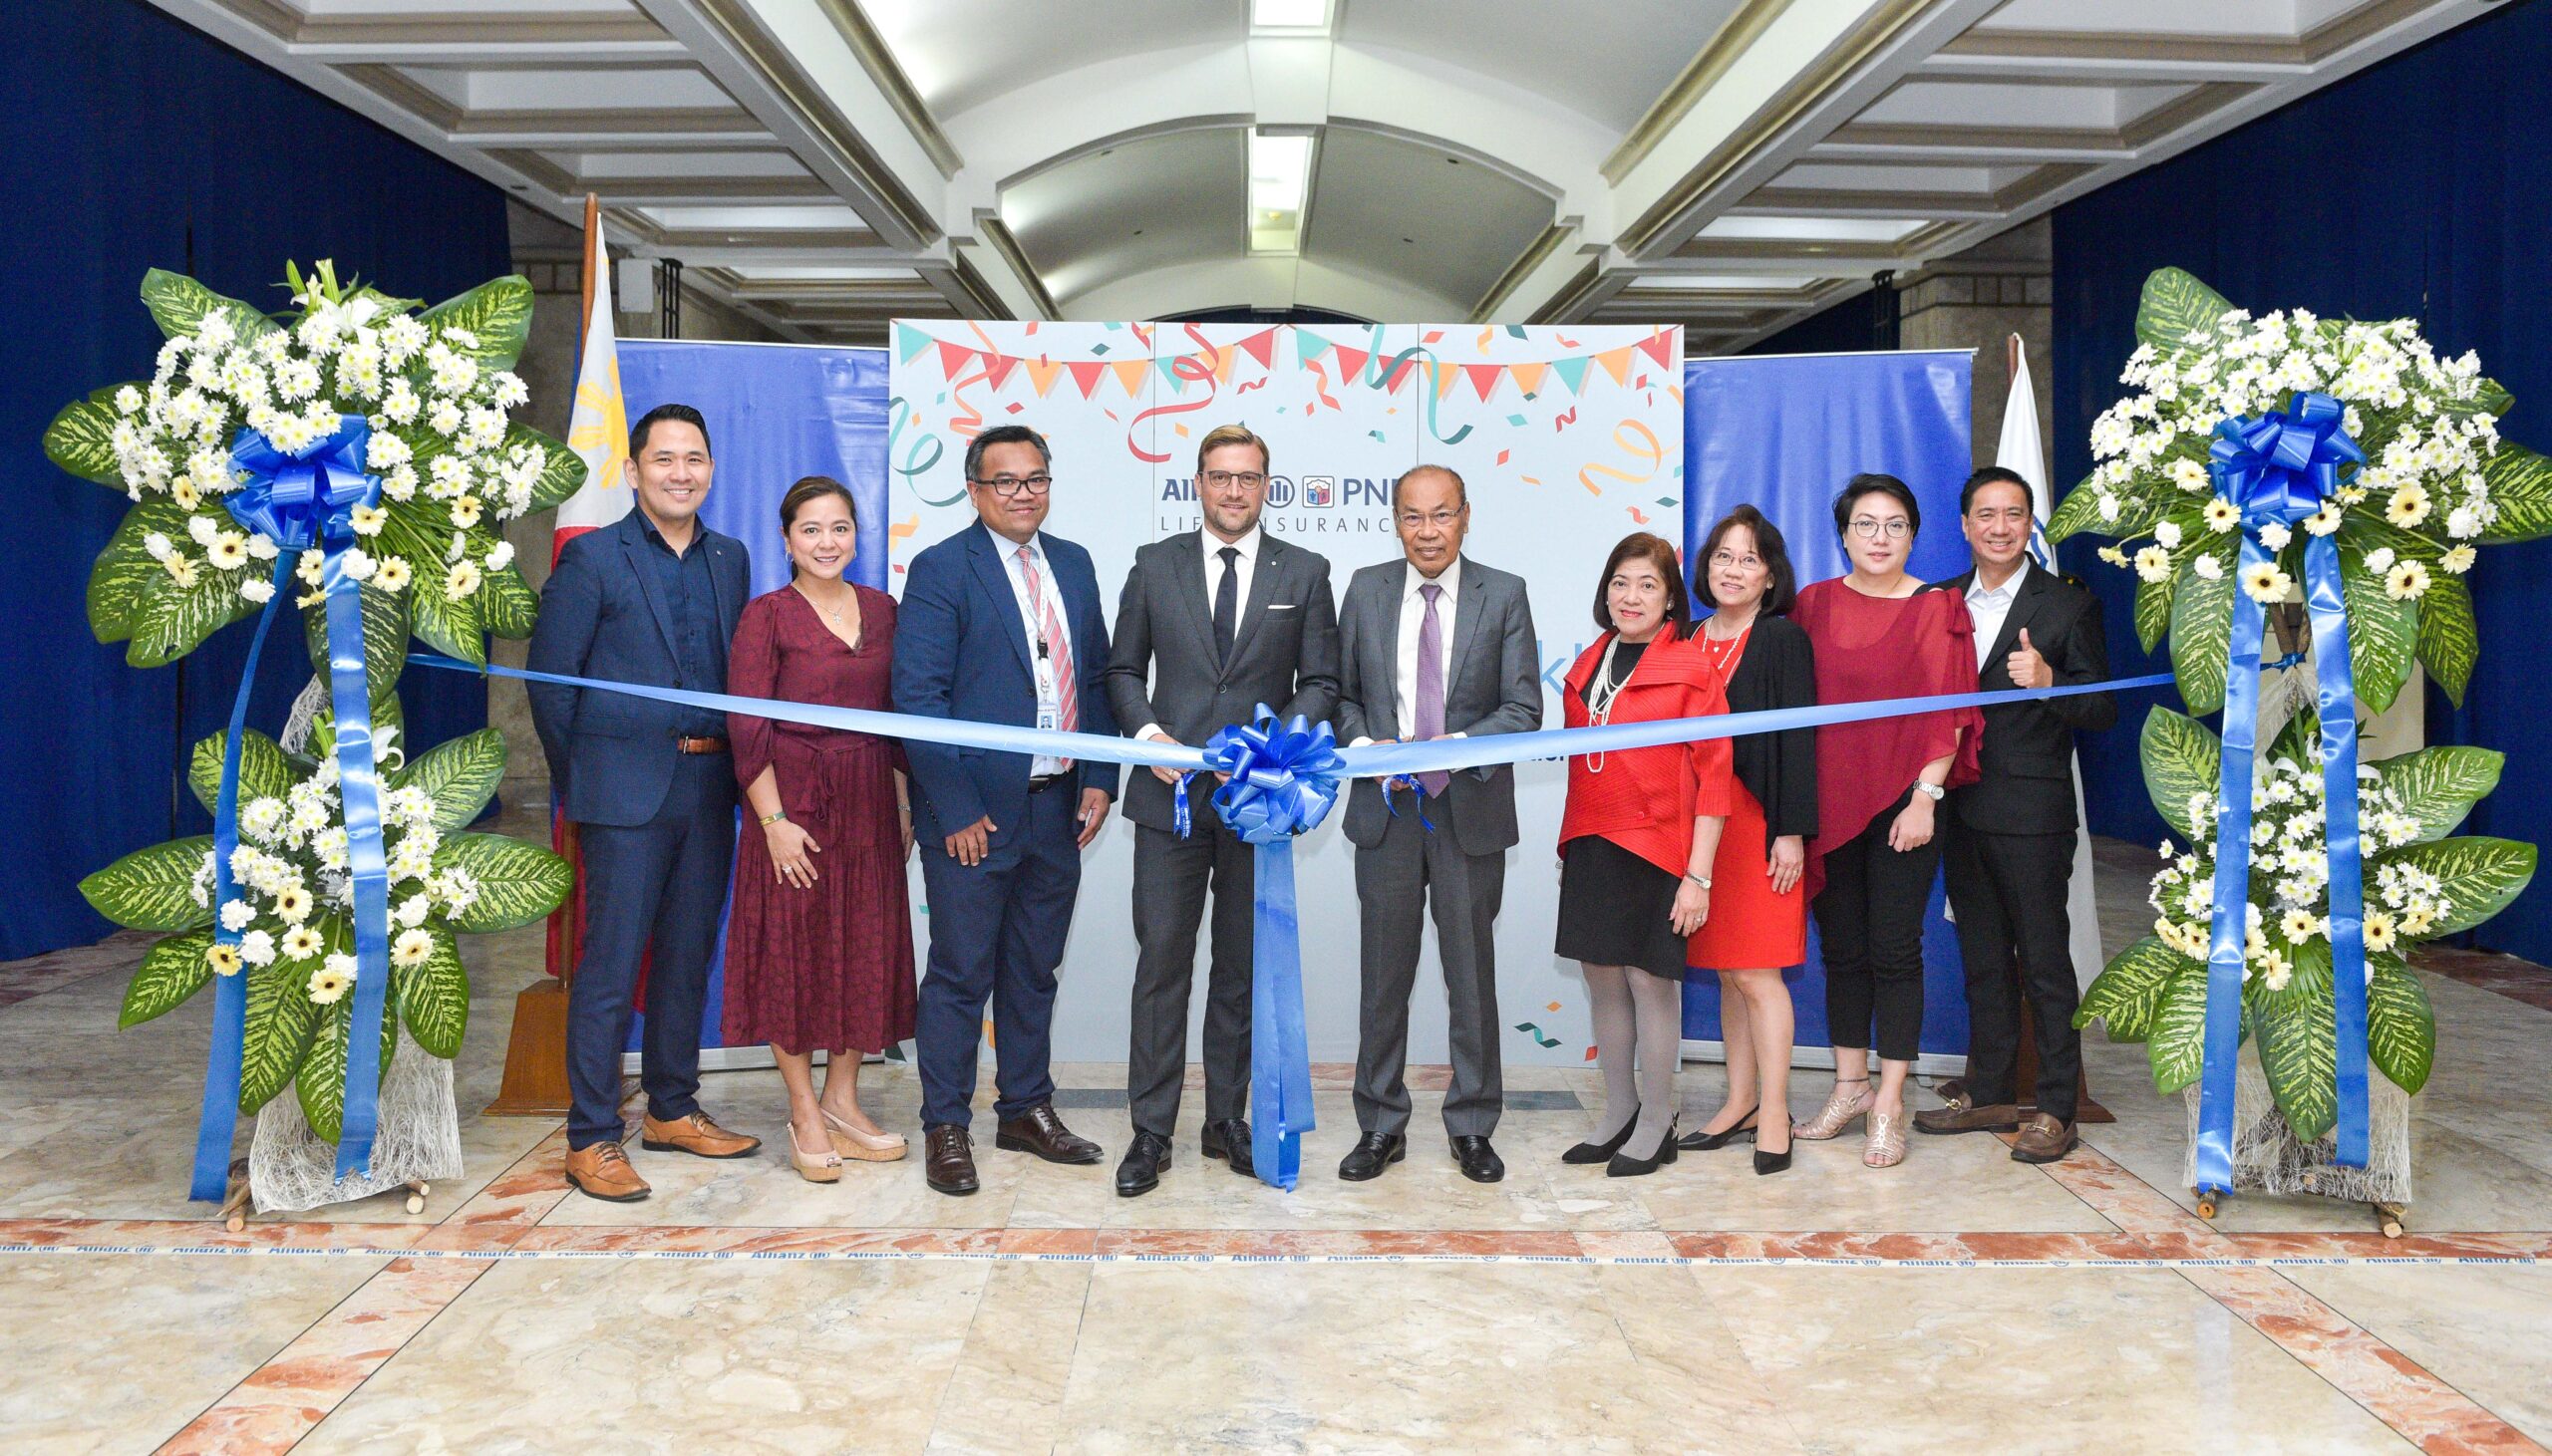 Allianz PNB Life, PNB strengthen joint commitment to customers’ protection and health through new Life Track Station launch 1